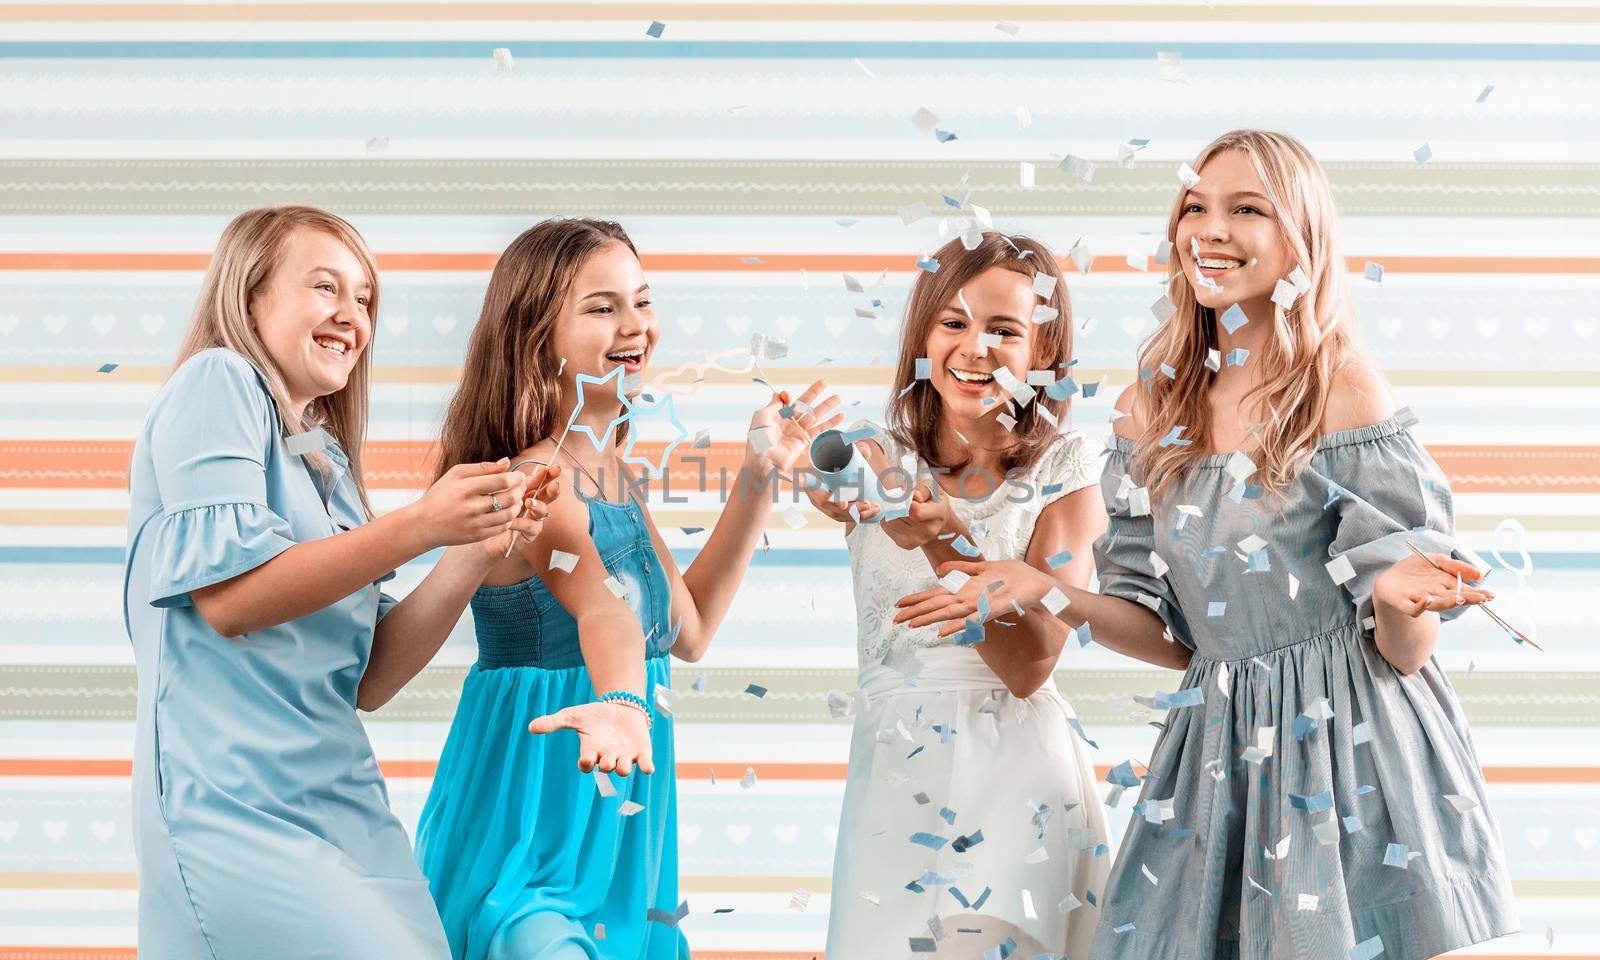 Smiling girls shoot confetti on striped background